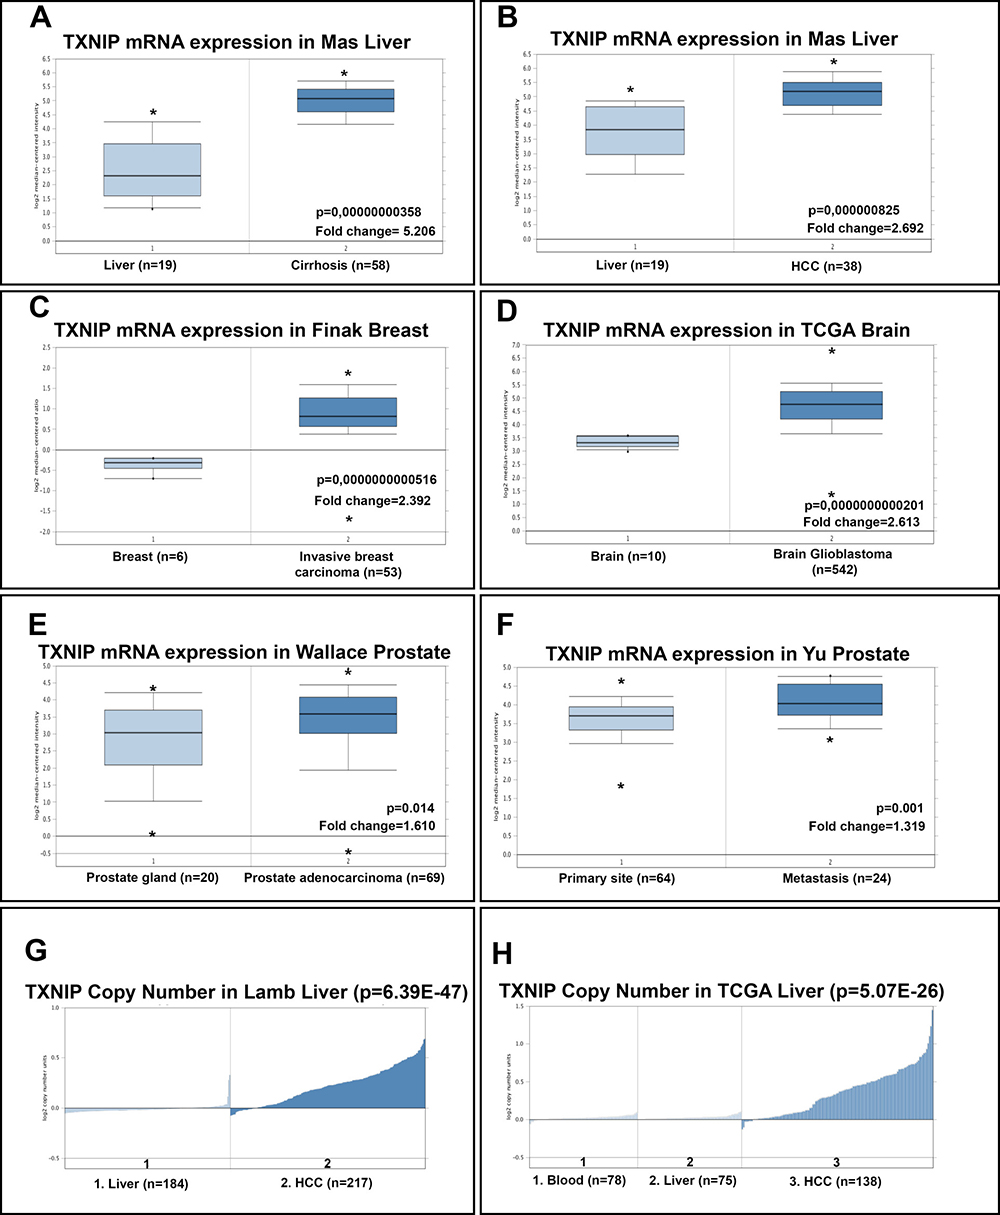 Oncomine analysis of TXNIP mRNA levels and copy number of TXNIP gene in cancer versus normal tissues.